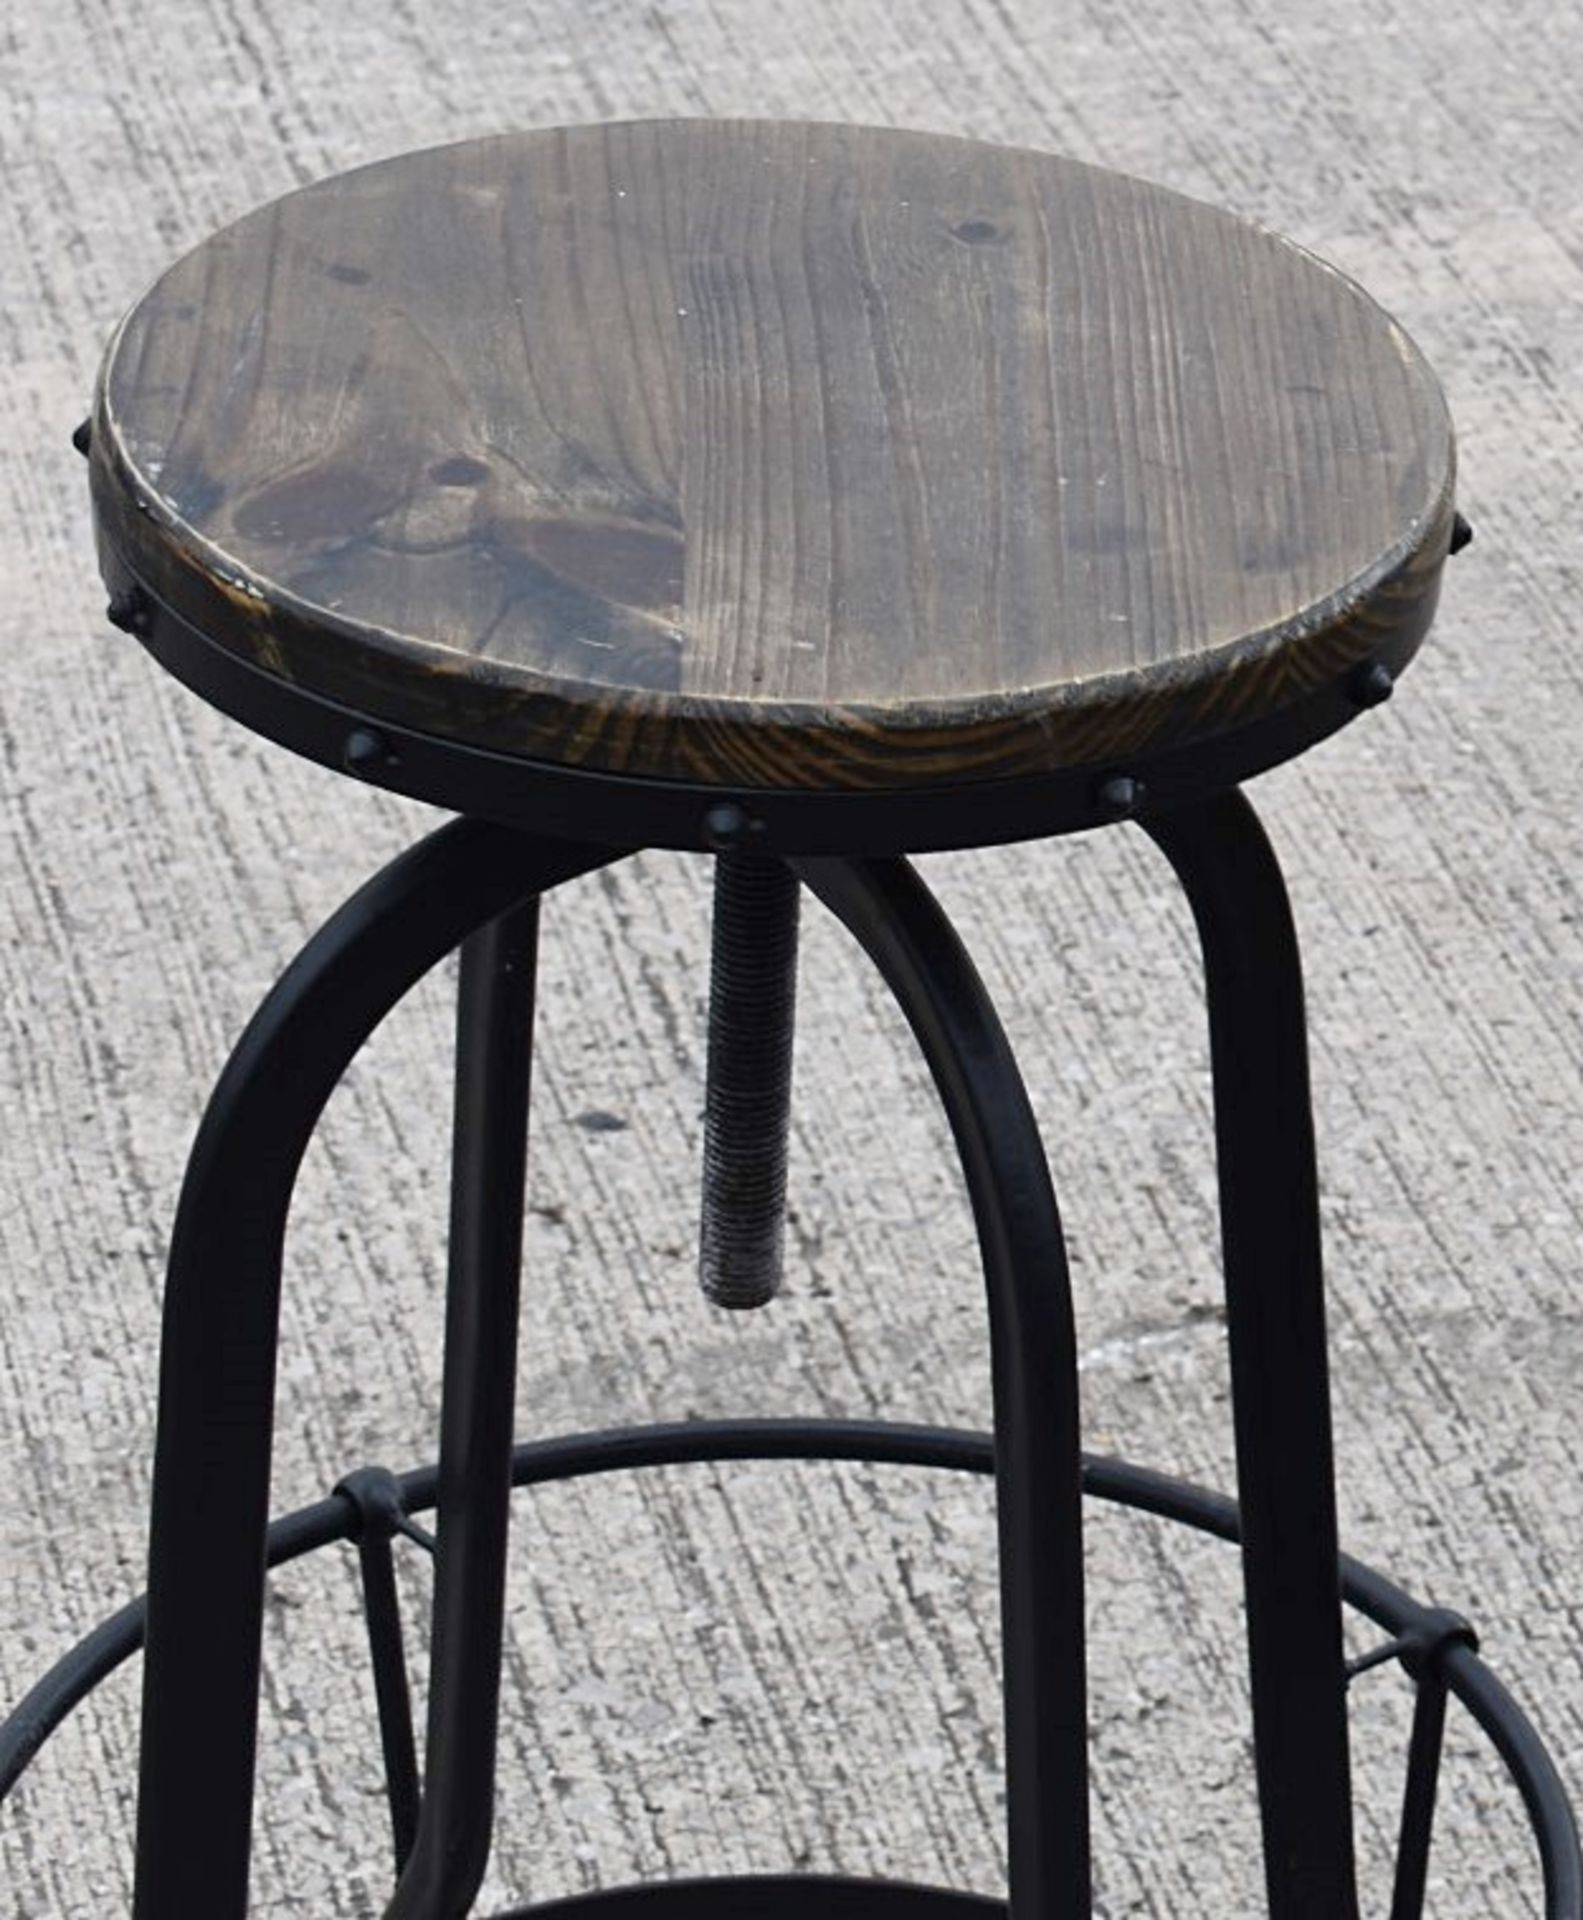 Pair of Rustic Iron Adjustable Bar Stools With Curved Legs and Wooden Seats - Image 4 of 6